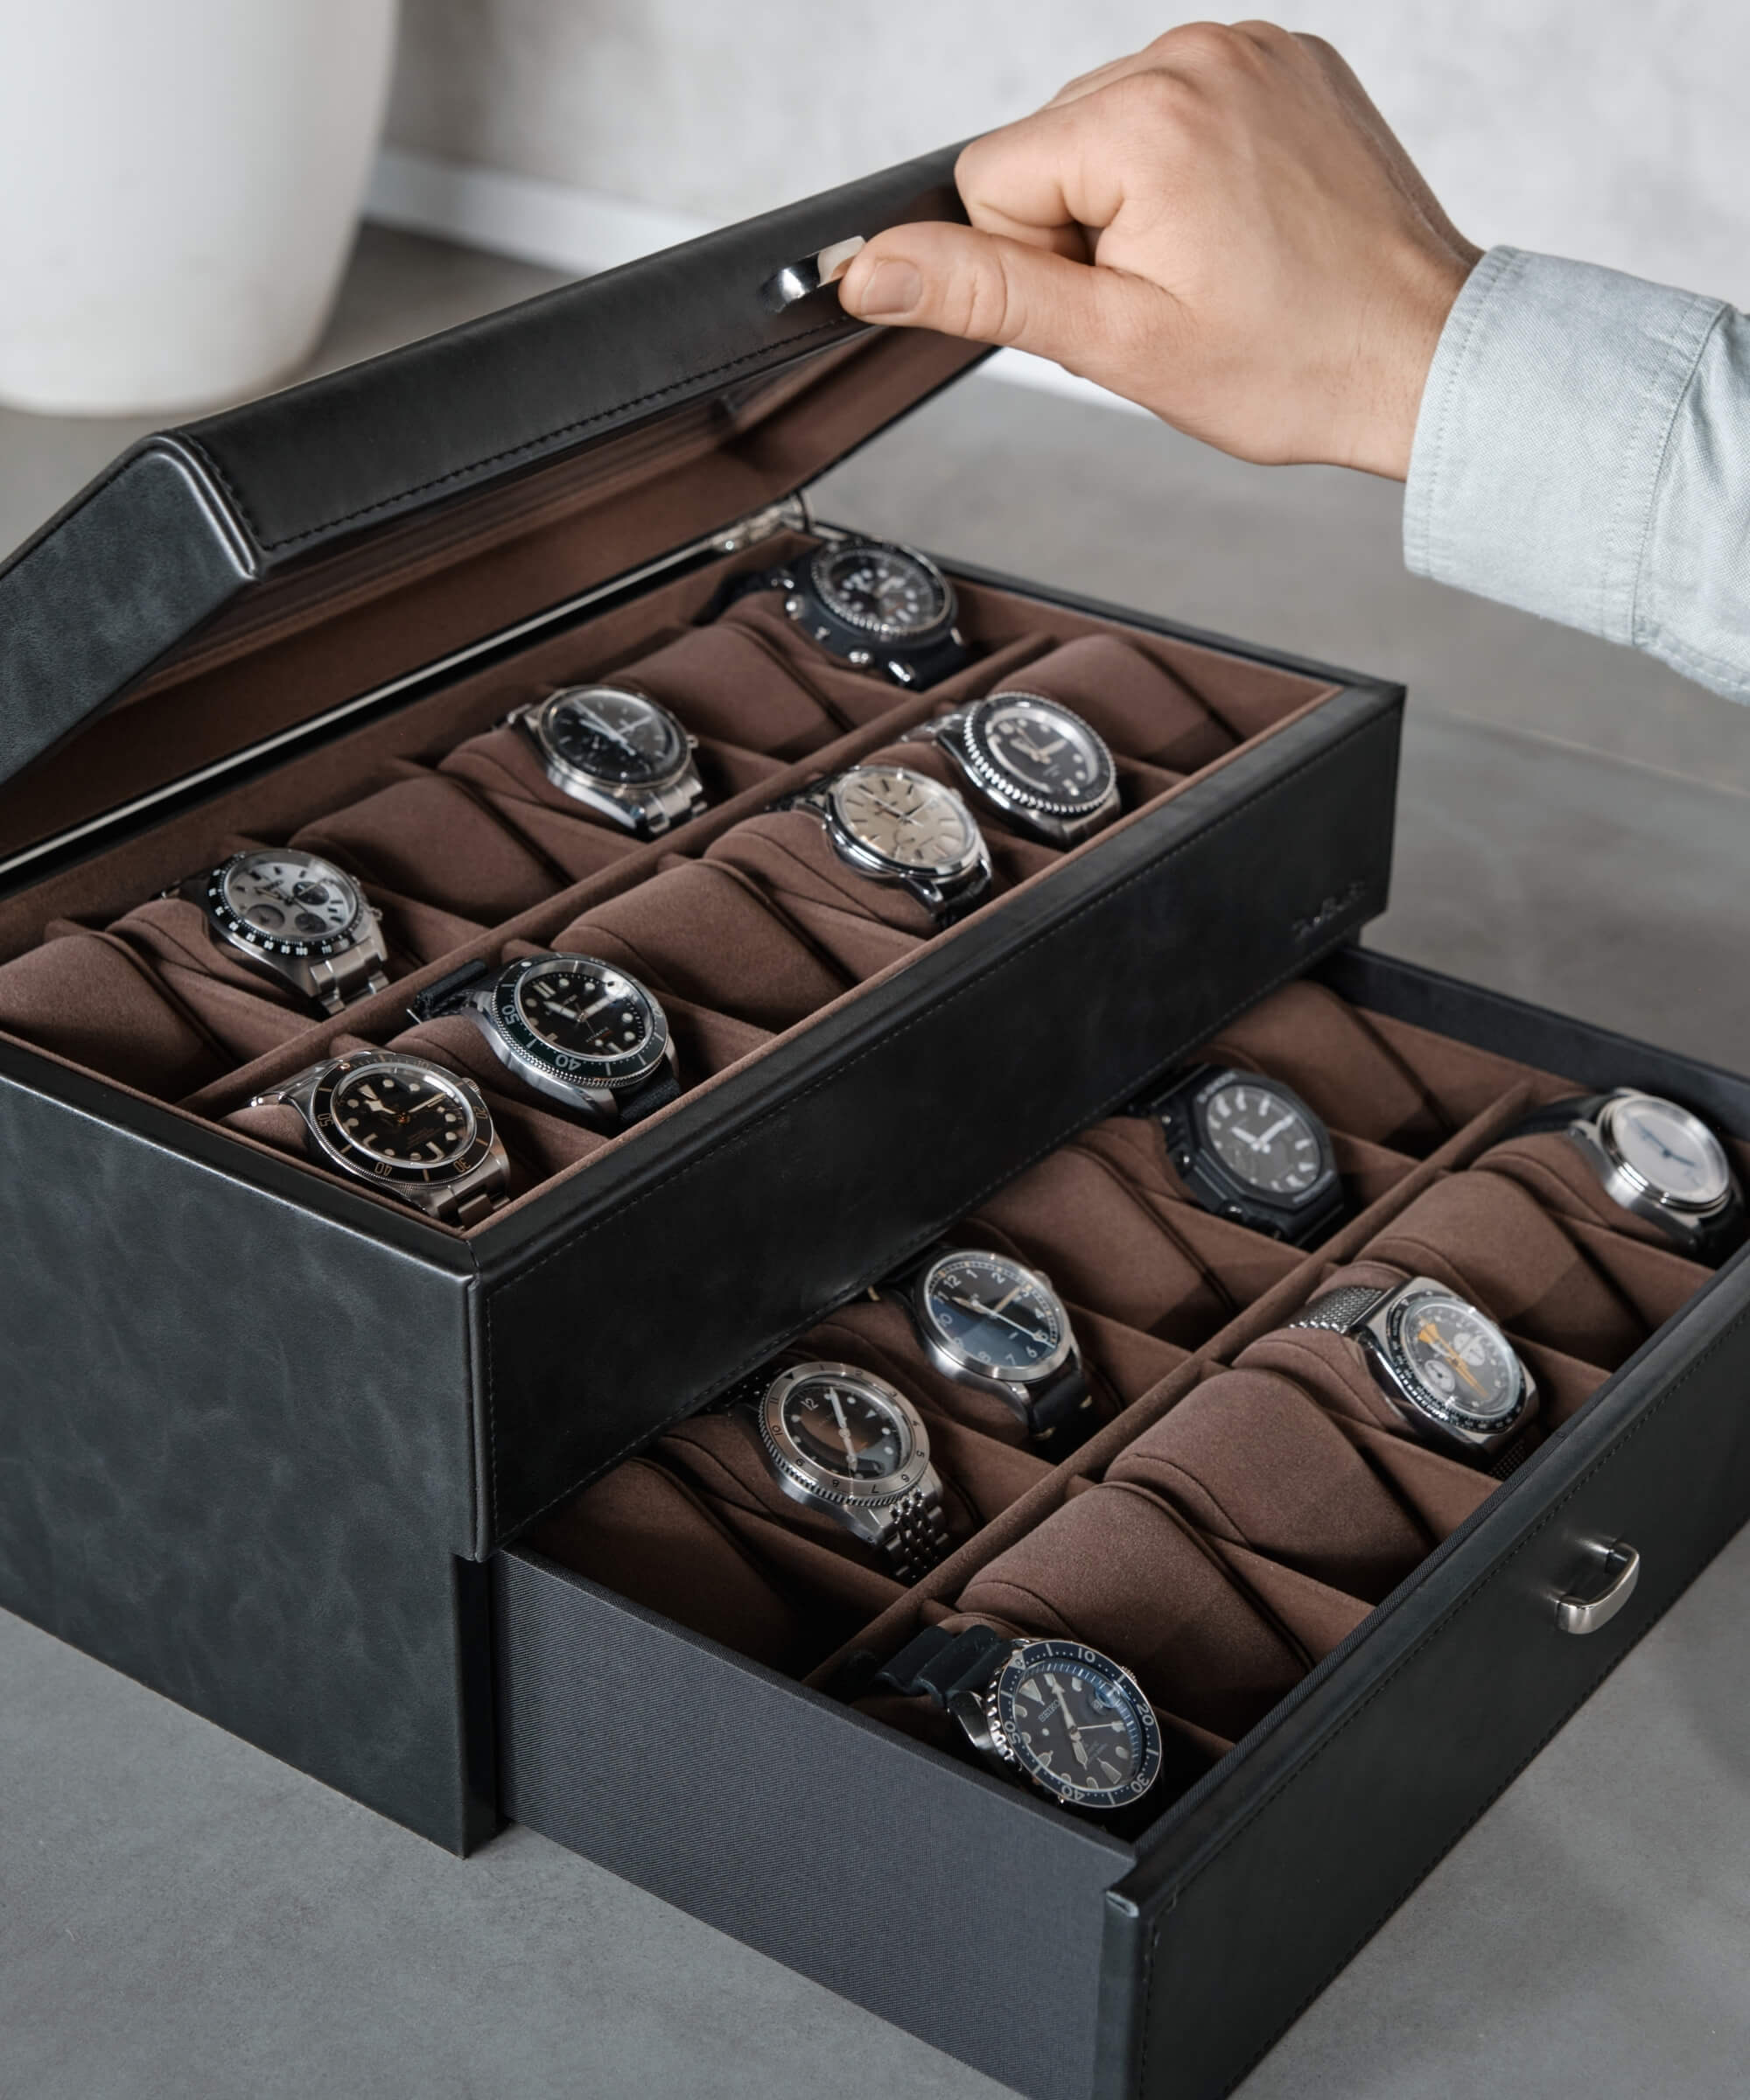 A man is using a TAWBURY Bayswater 24 Slot Watch Box with Drawer - Black to organize and protect his collection of watches.